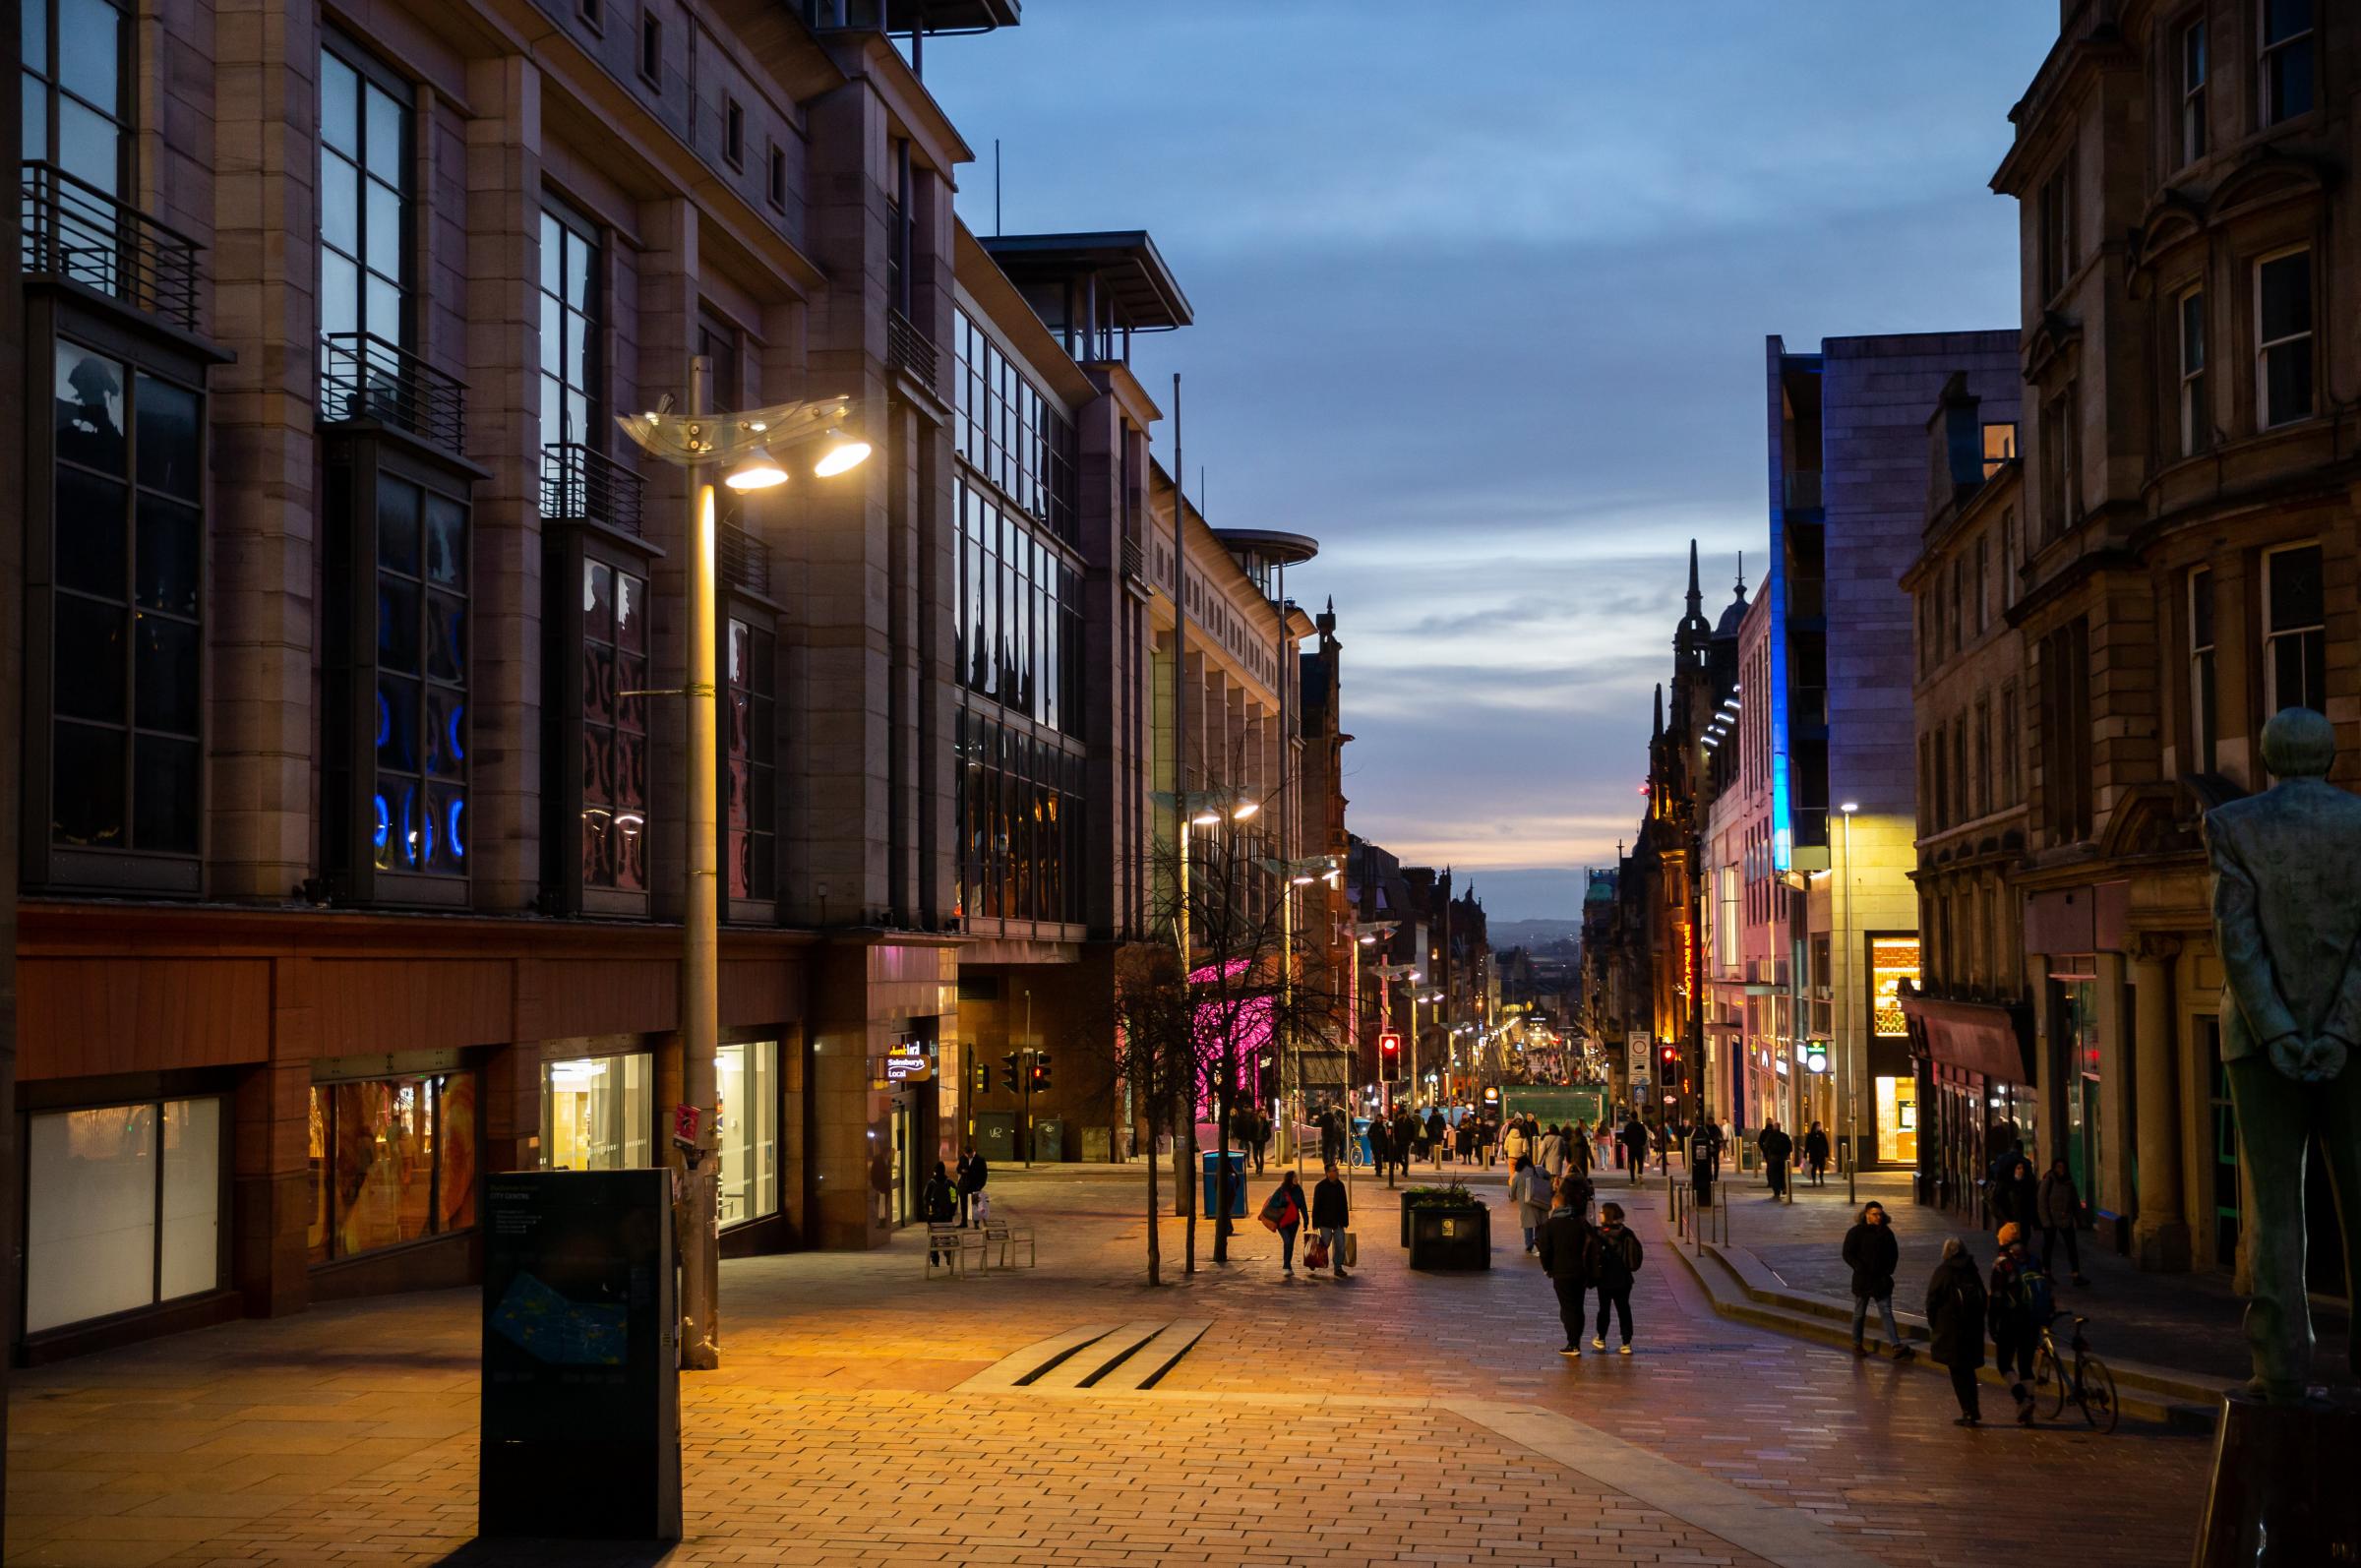 Buchanan Galleries could be replaced with mixed-use urban neighbourhood